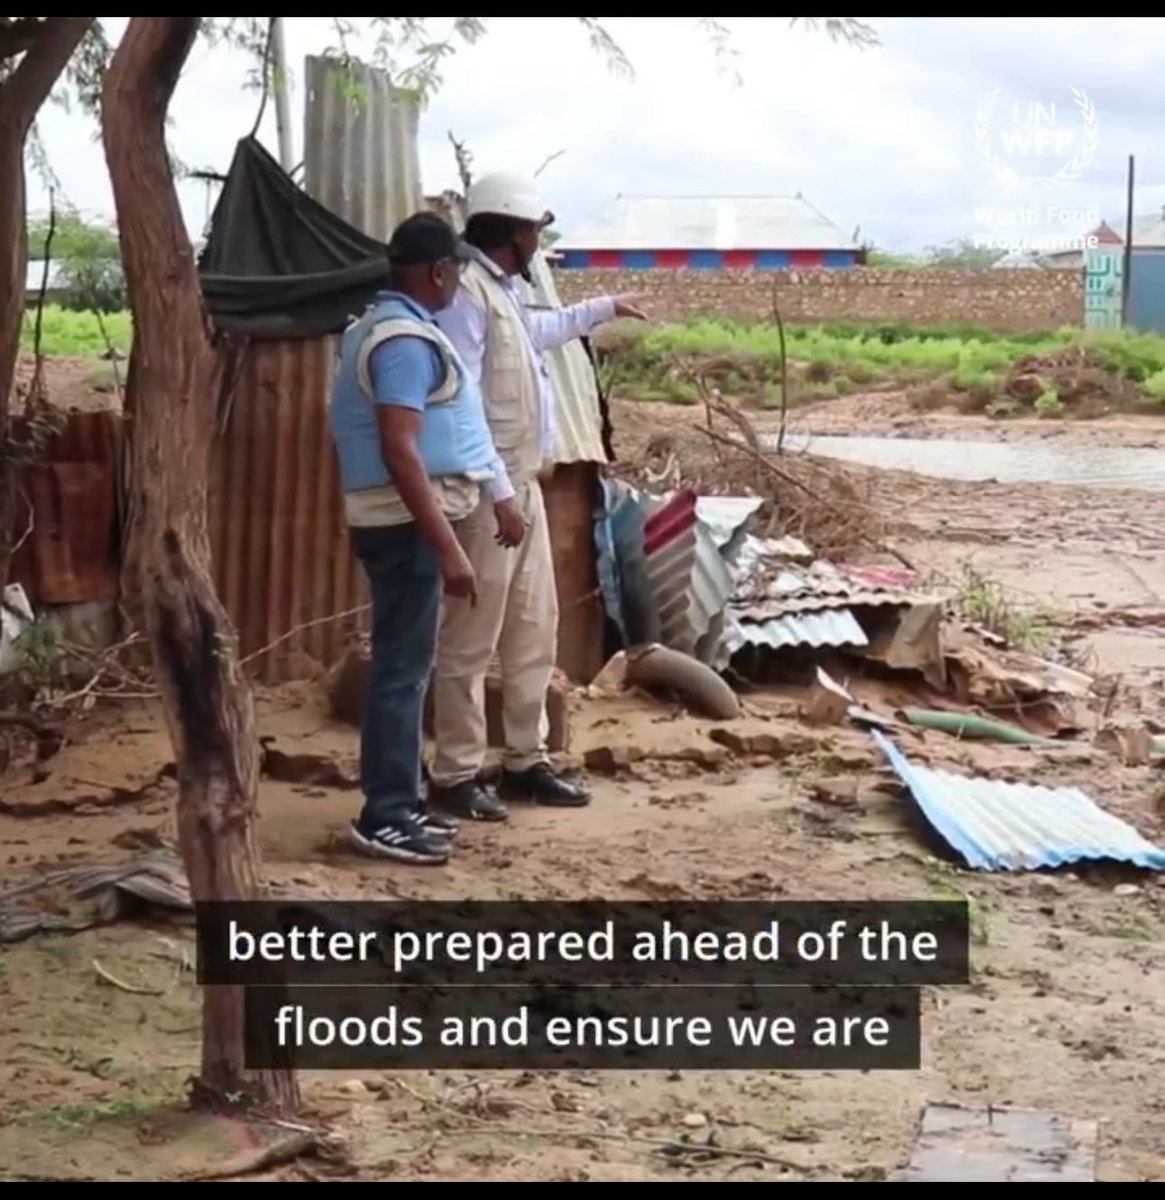 #Somalia’s Disaster Management Agency @SoDMA_Somalia is carrying out early warning messaging to enable communities to prepare for floods in #Somalia with the support of #WFP.